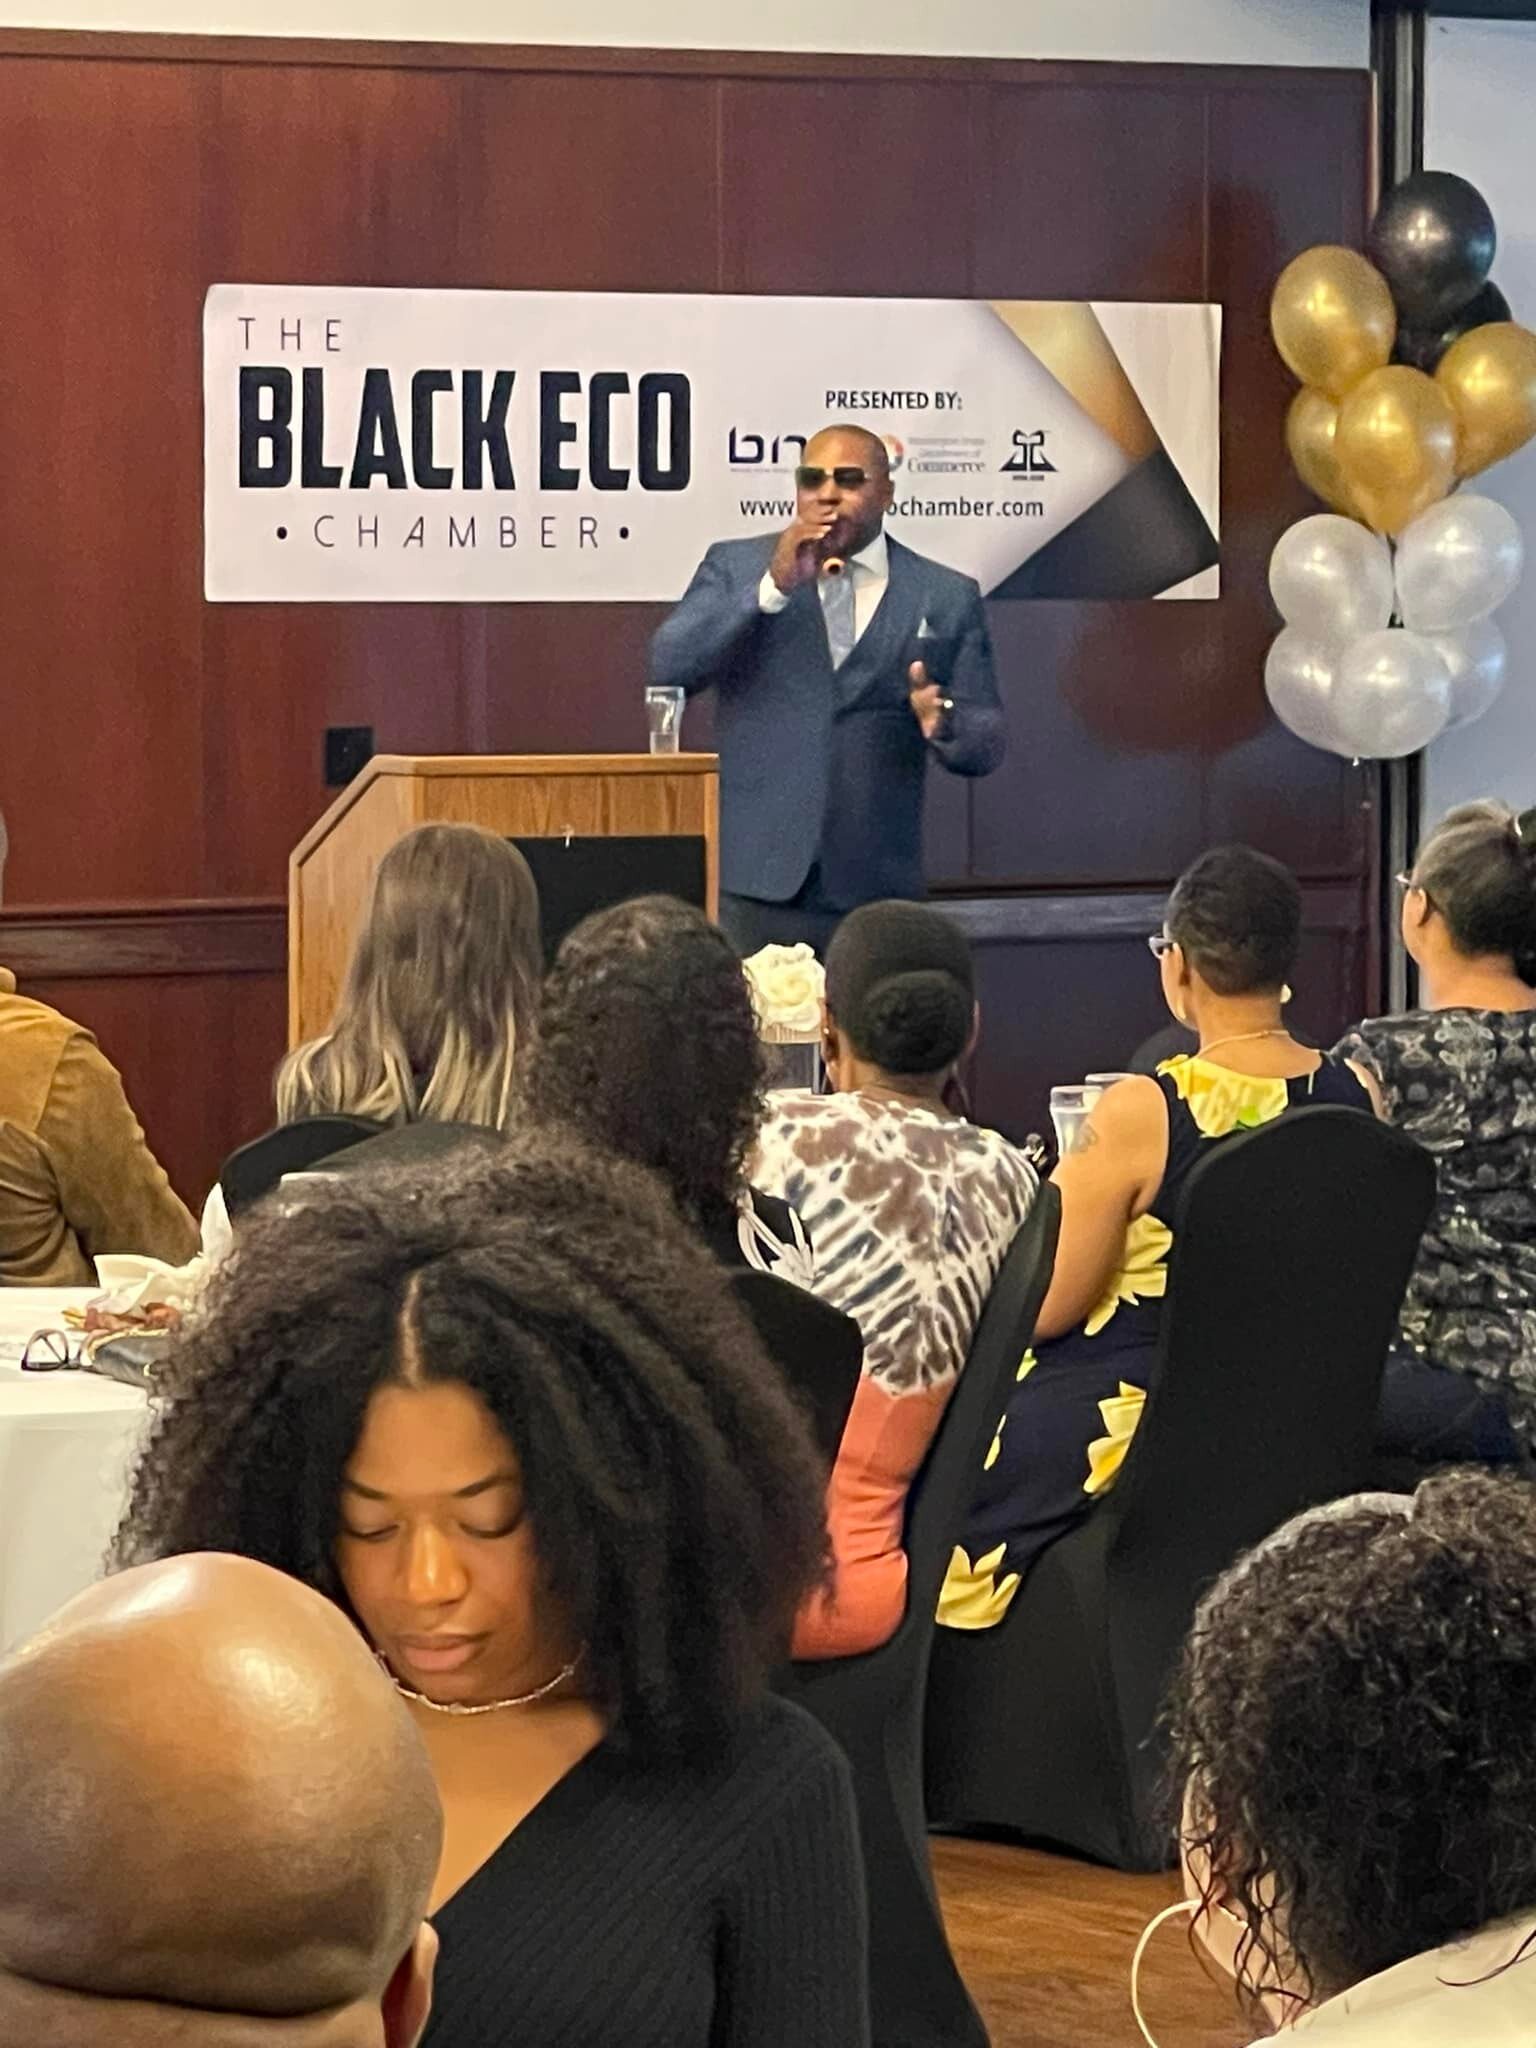 Had to support my guys Shyan Selah, Jesse Elijah Johnson, the Director and Deputy Director of Black Equity for the Biden White House Larry Bowden, Alexis Holmes at the Black Eco Chamber event. Oh, and of course my guys DJ KUN LUV and Dre James were i